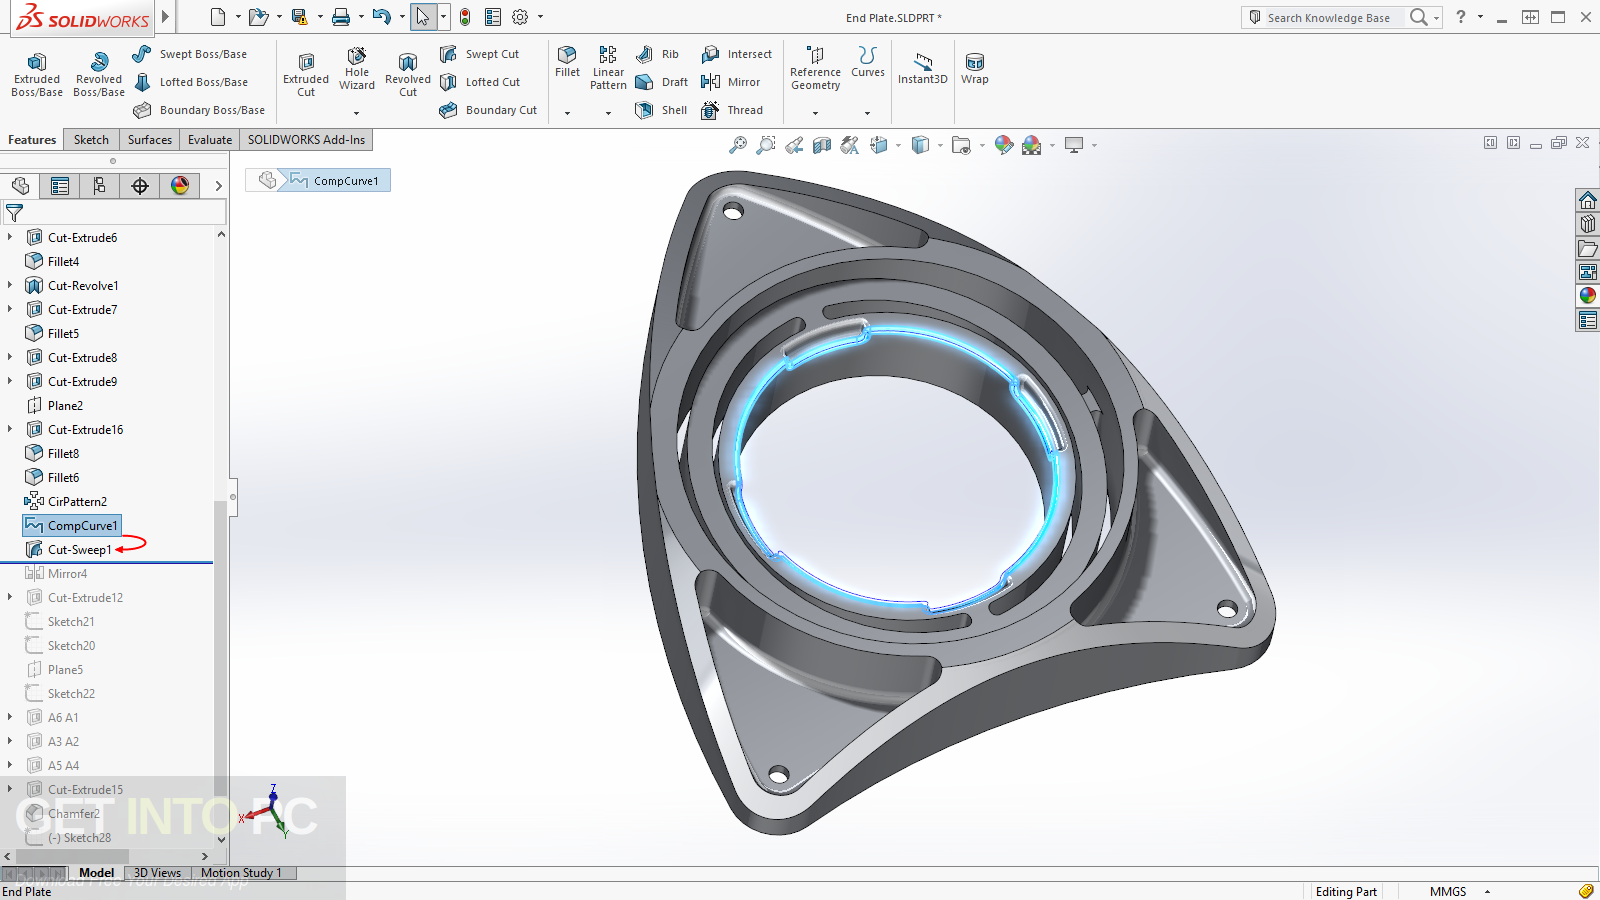 solidworks 2009 portable free download